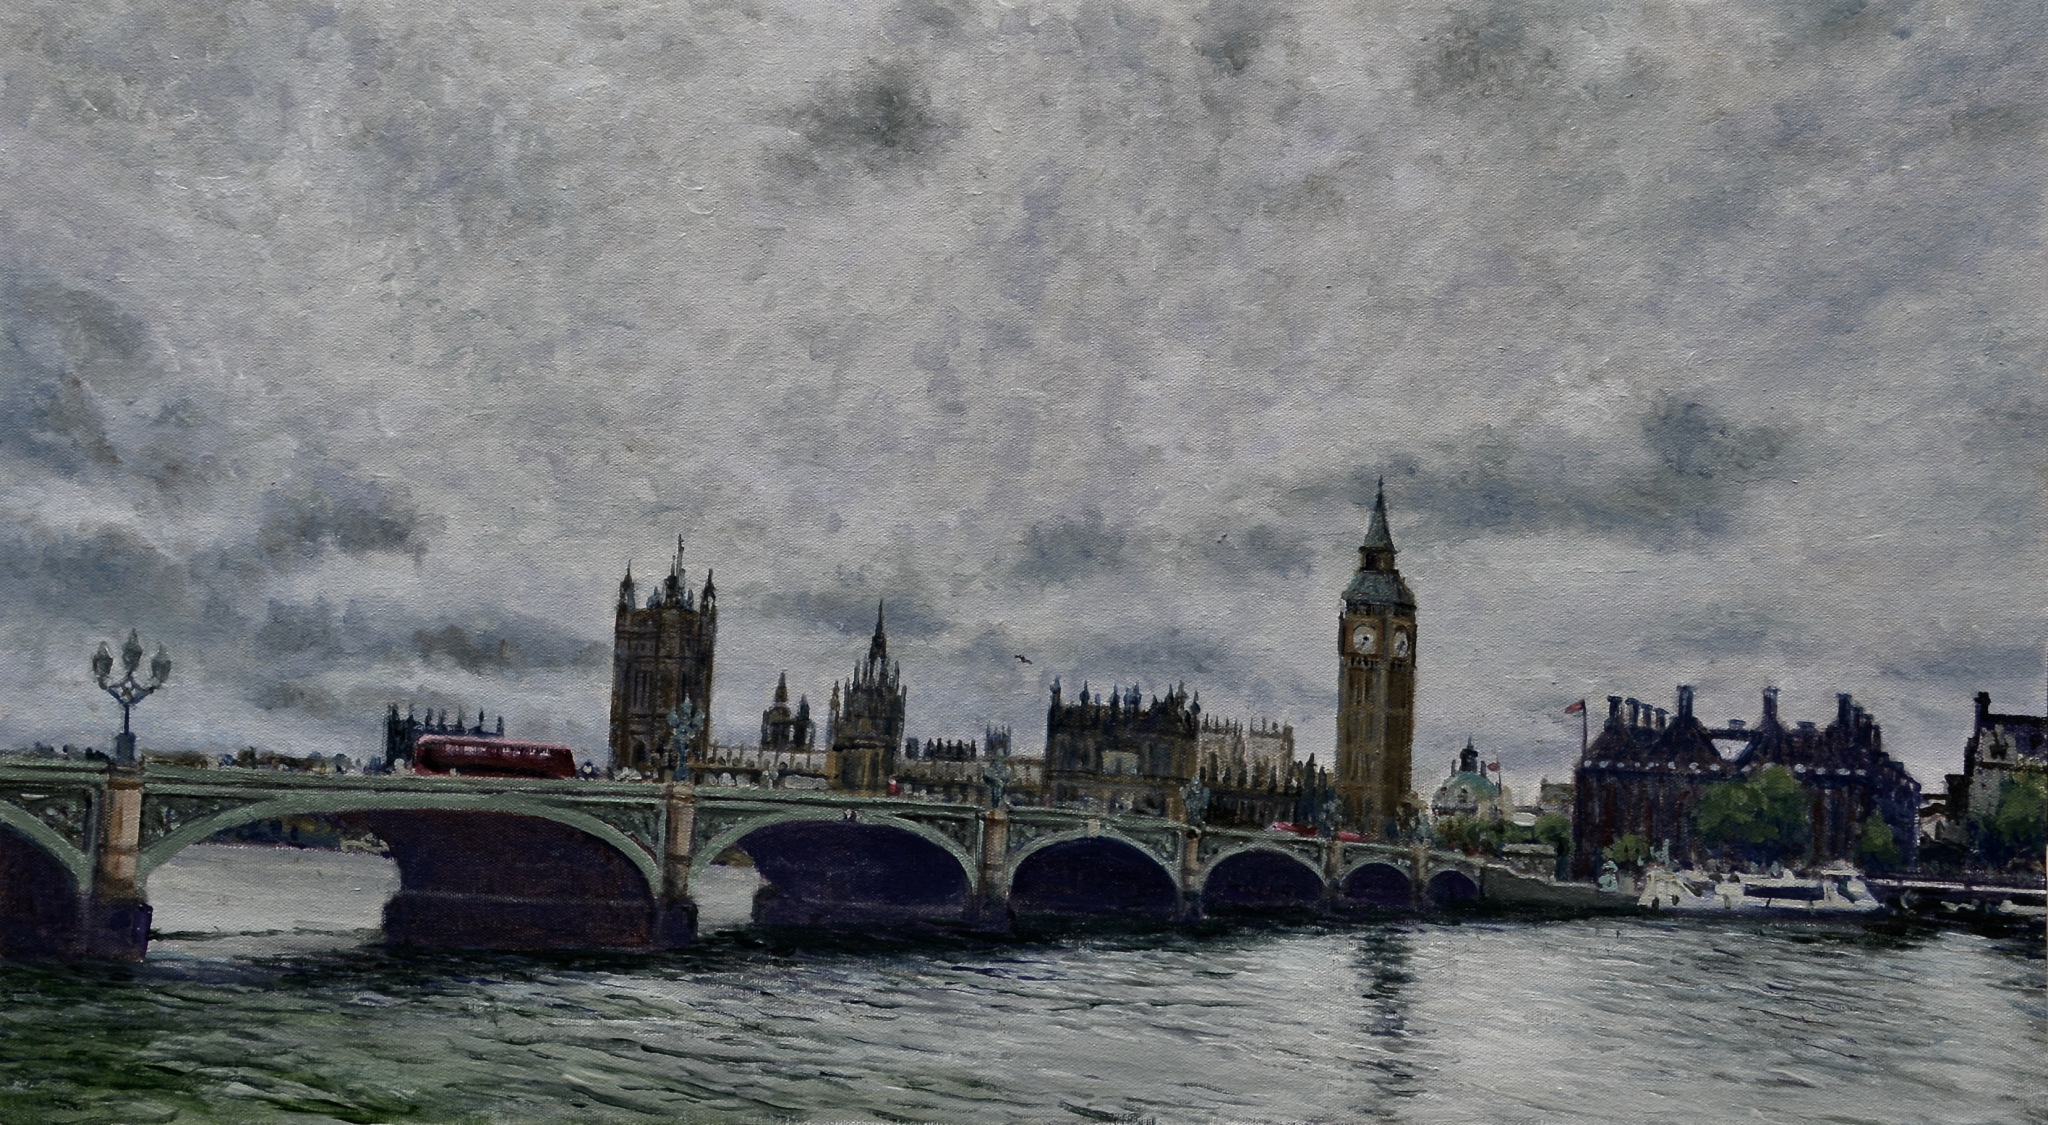 Click here to view Waterloo Bridge by Paul Means